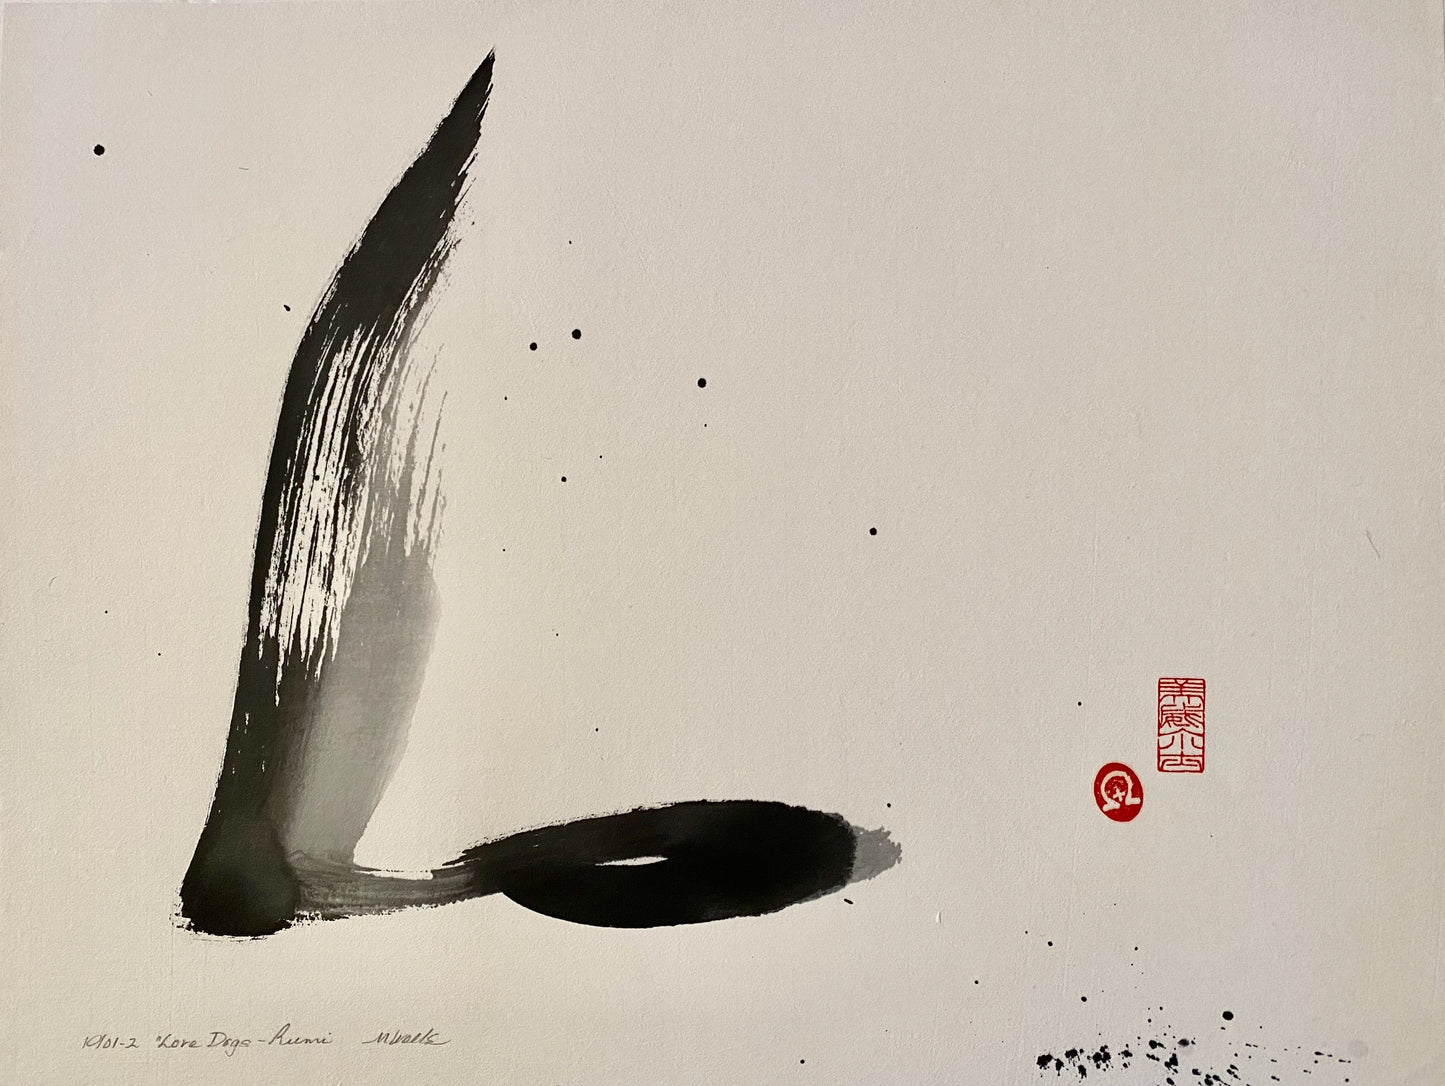 Abstract sumi e print by Marilyn Wells based on “Love Dogs” - Rumi poem. Ink on Paper